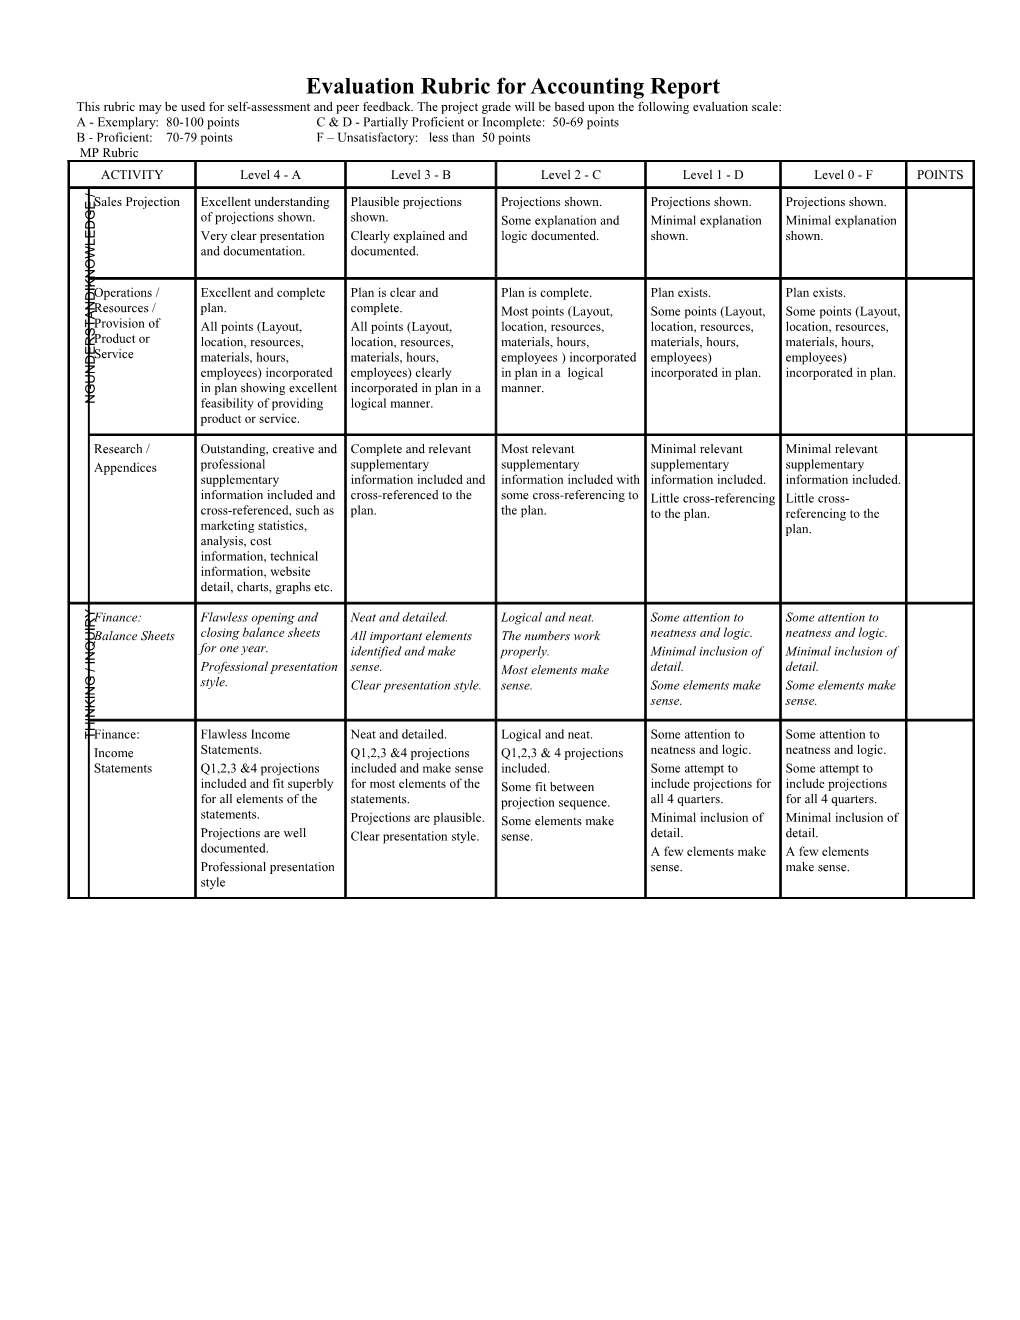 Evaluation Rubric for Accounting Report